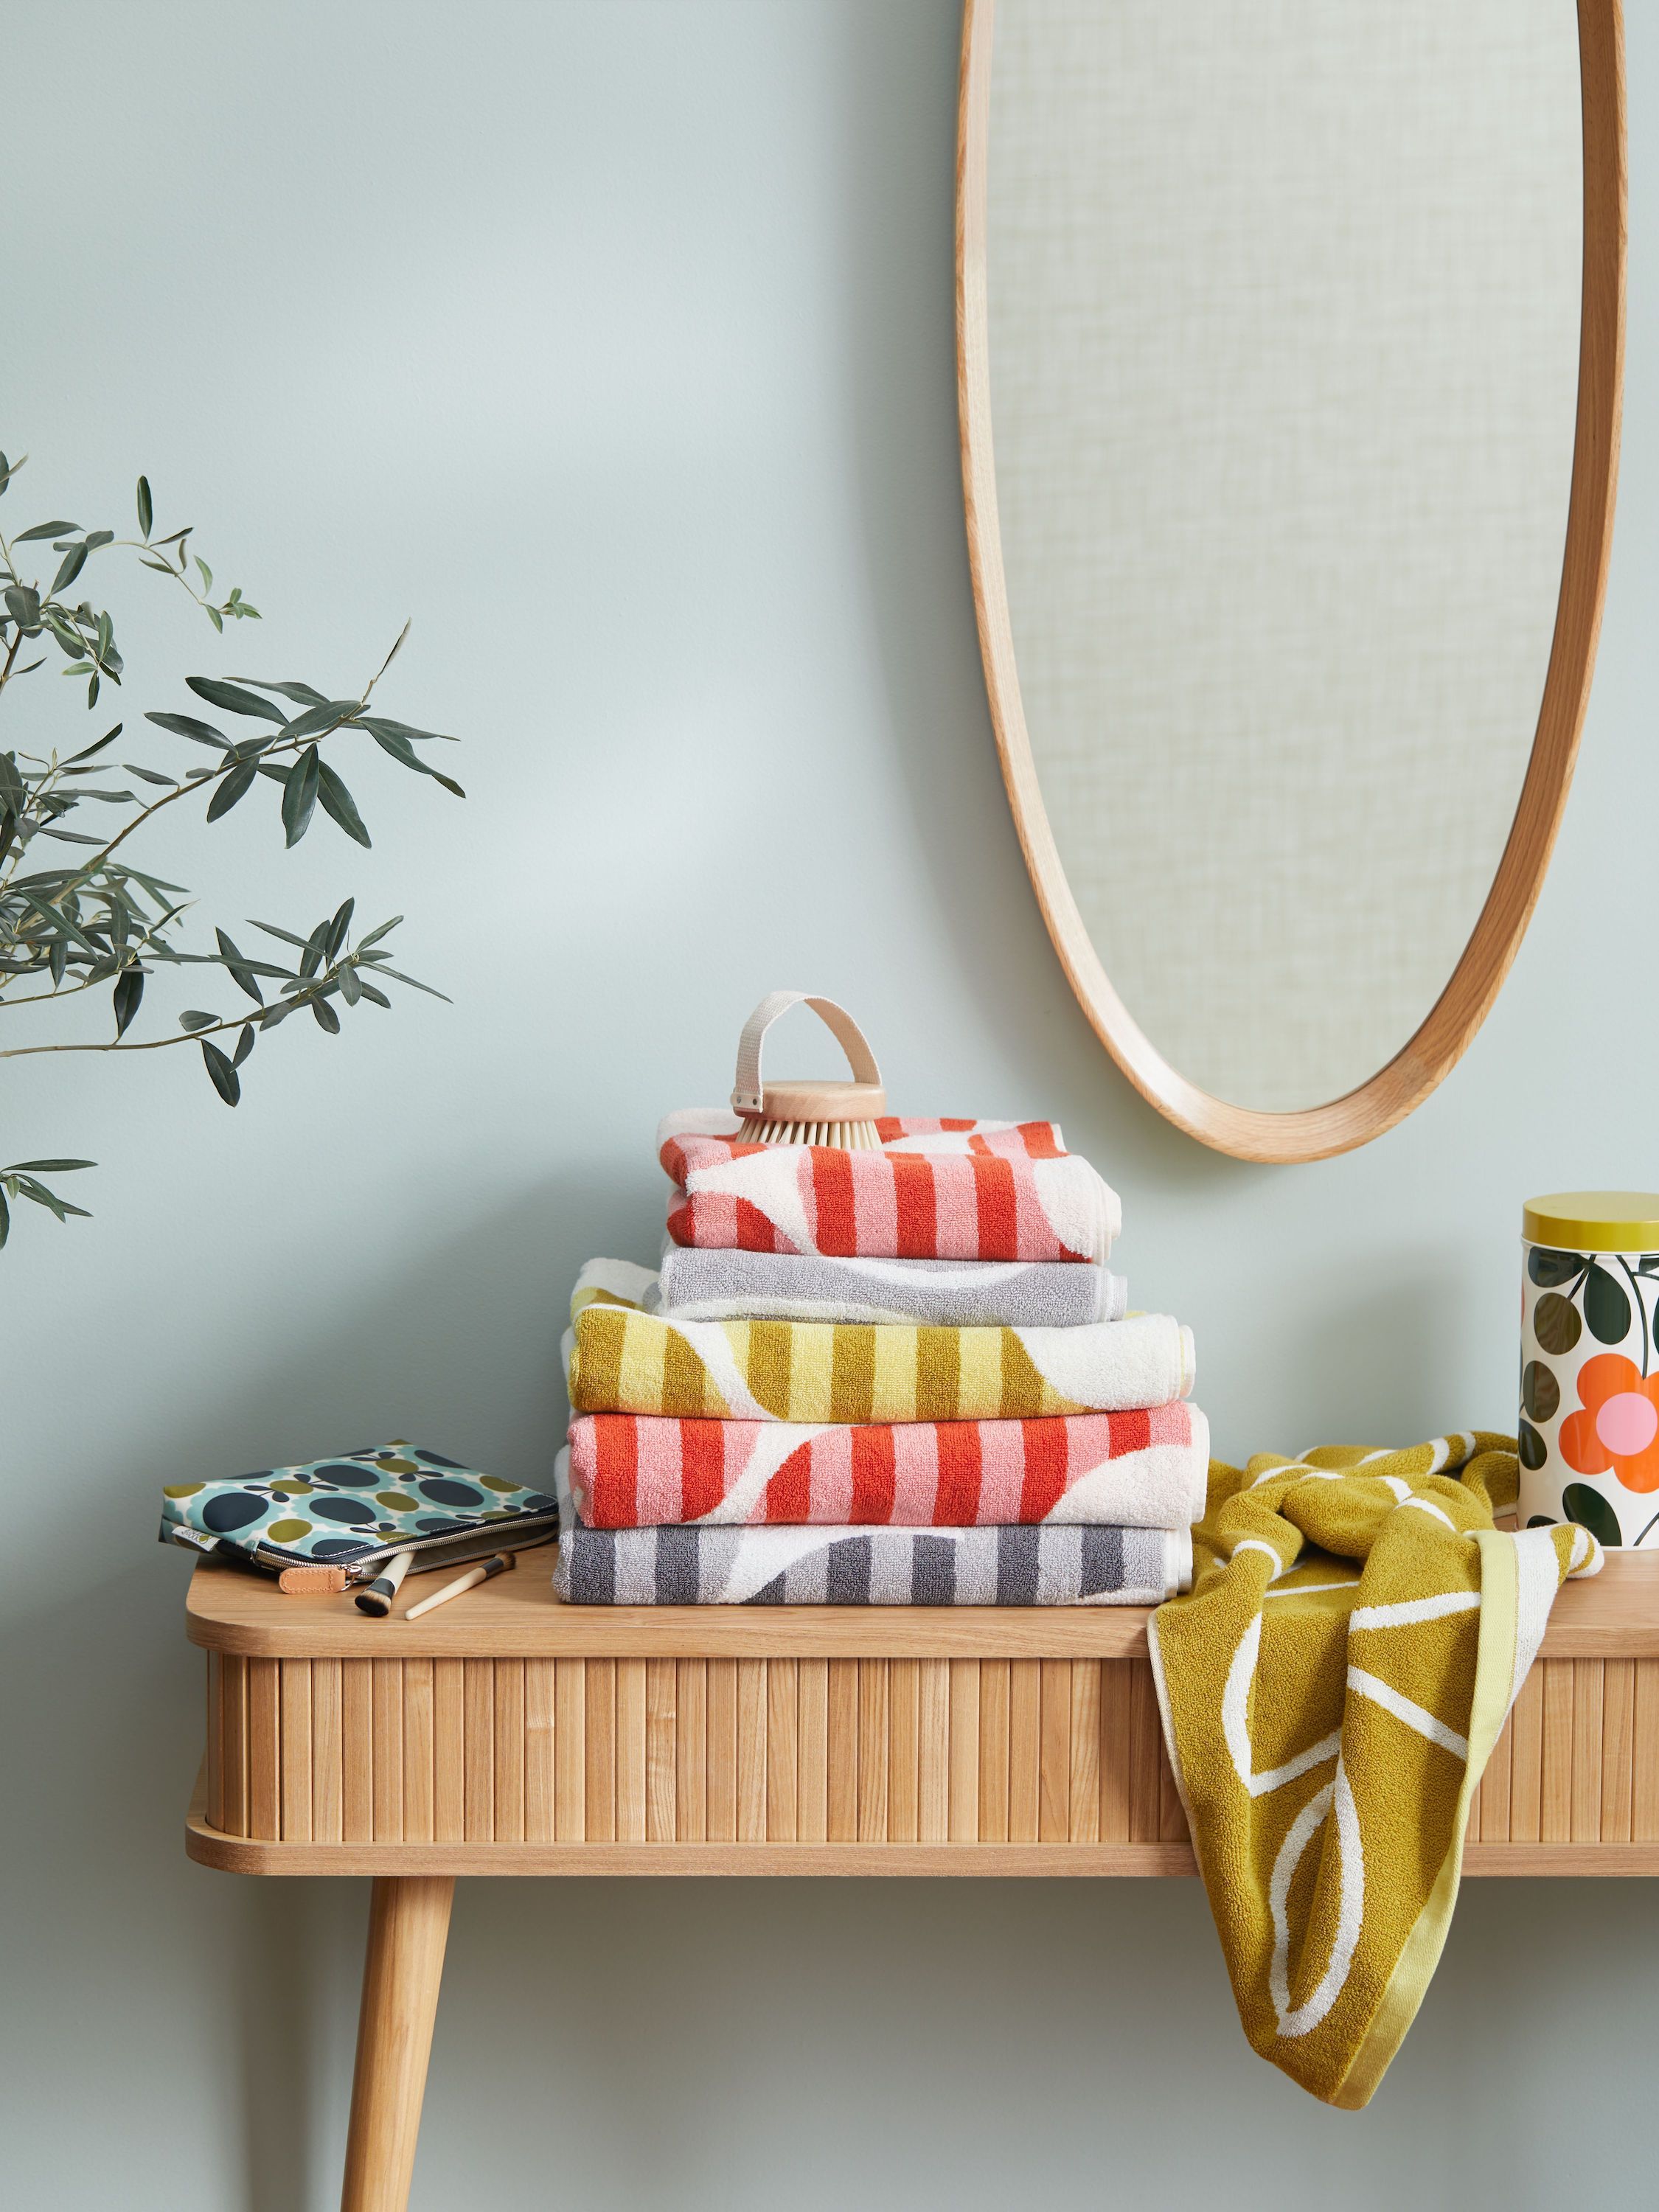 7 ways to make towels soft and fluffy — without a dryer